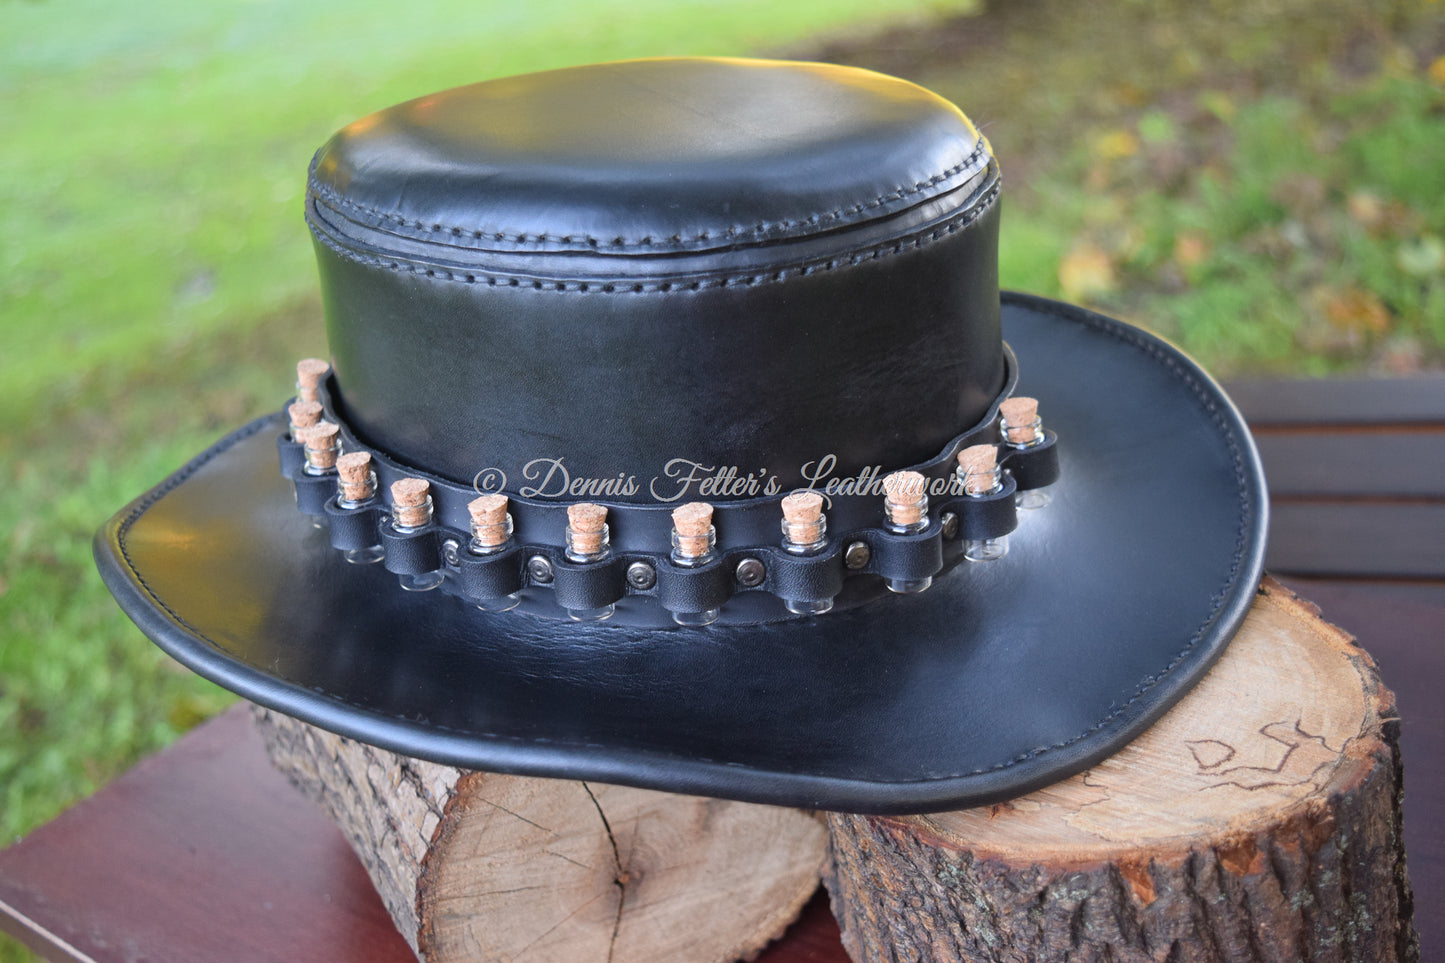 black leather alchemist / plague doctor hat - right side view showing the entire hat